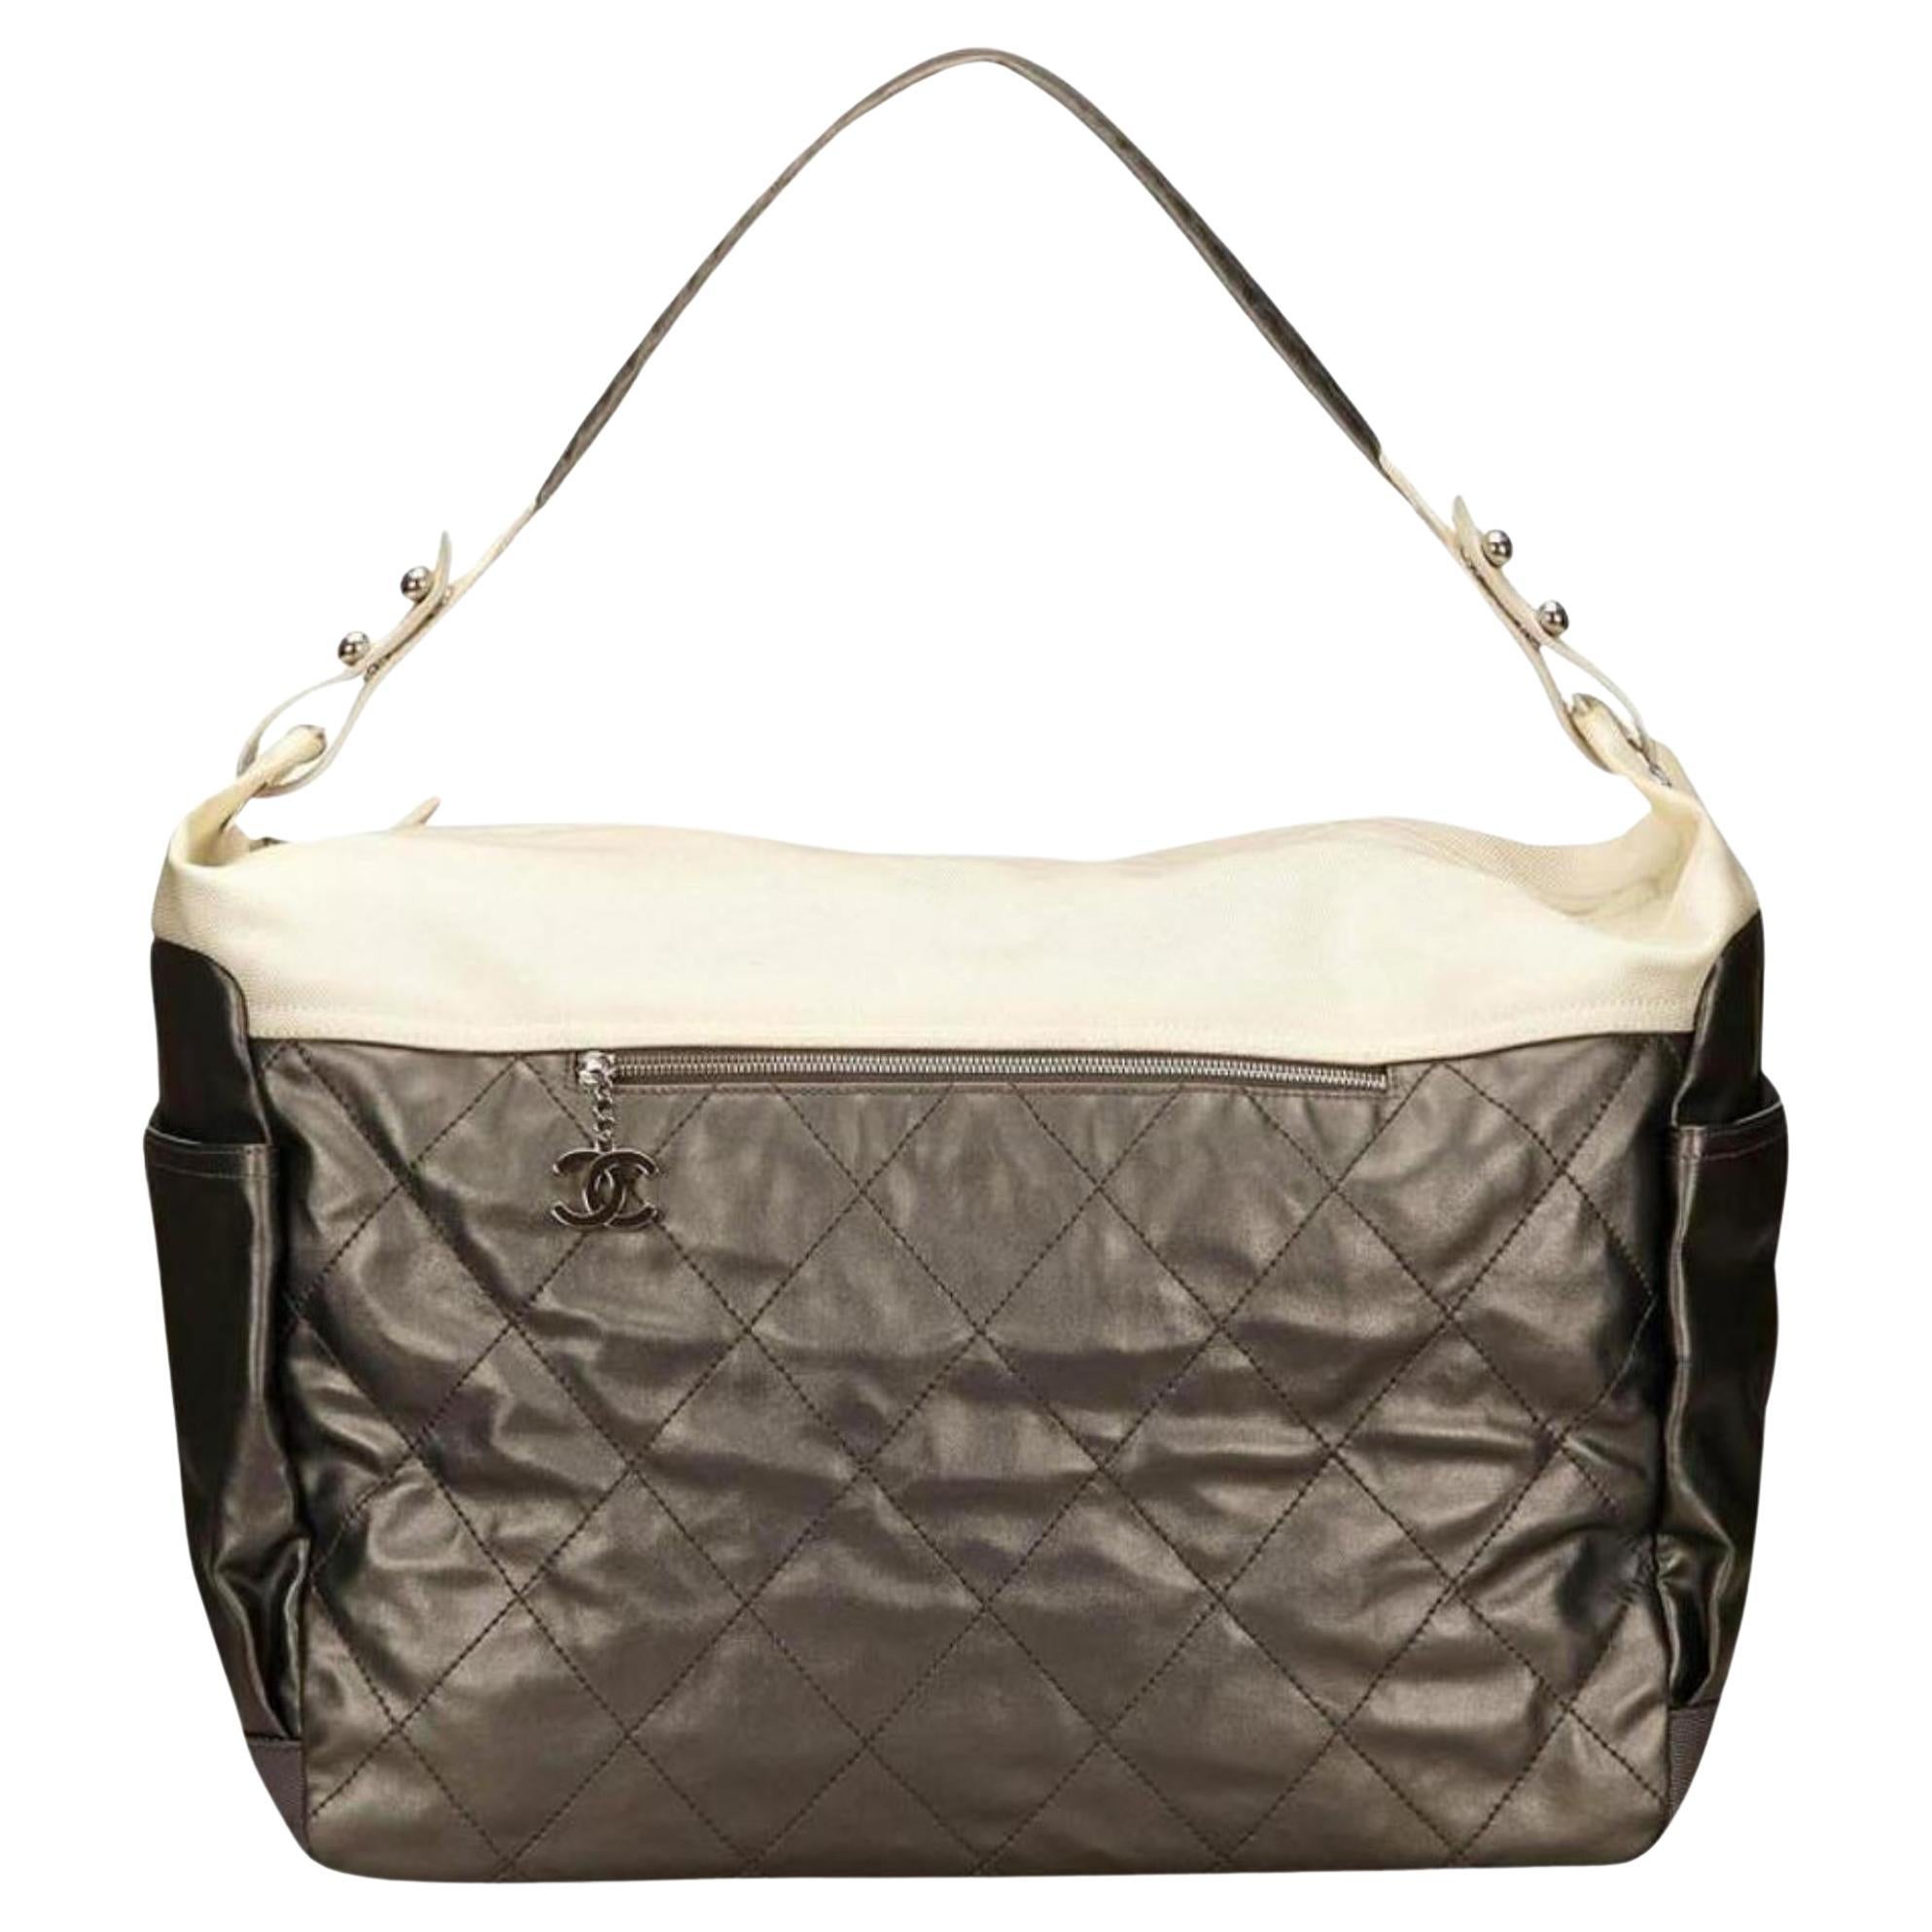 Chanel Large Silver and Cream Quilted Biarritz Paris Weekender Hobo 61ck38s